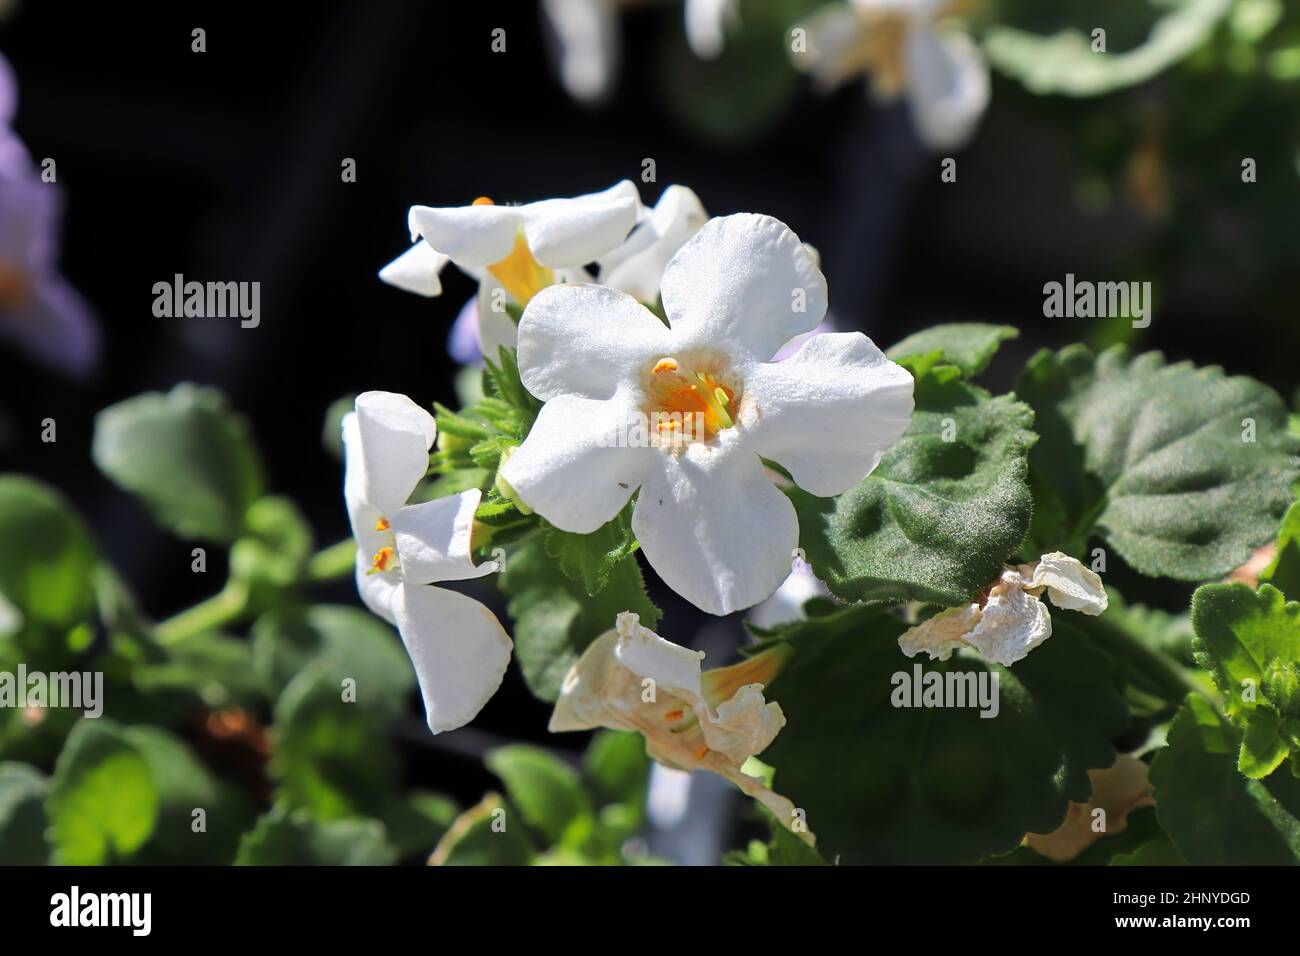 White and yellow delicated flowers on a Water Hyssop. Stock Photo